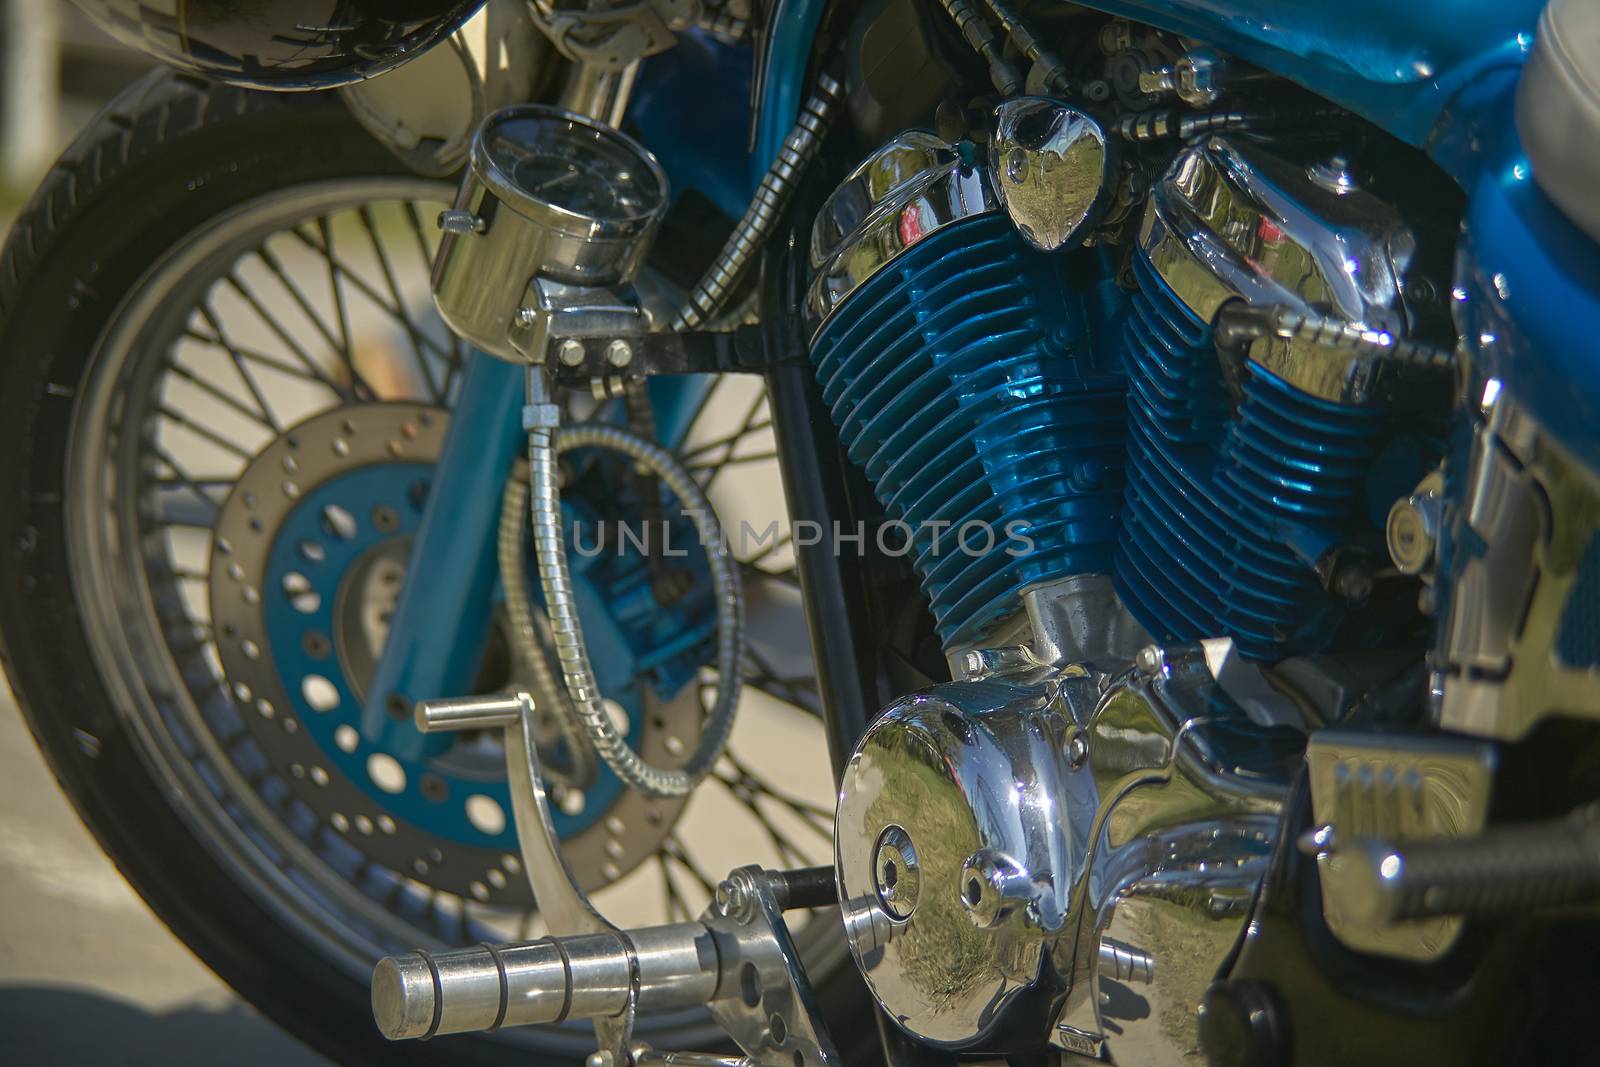 Engine of a custom painted bike by pippocarlot